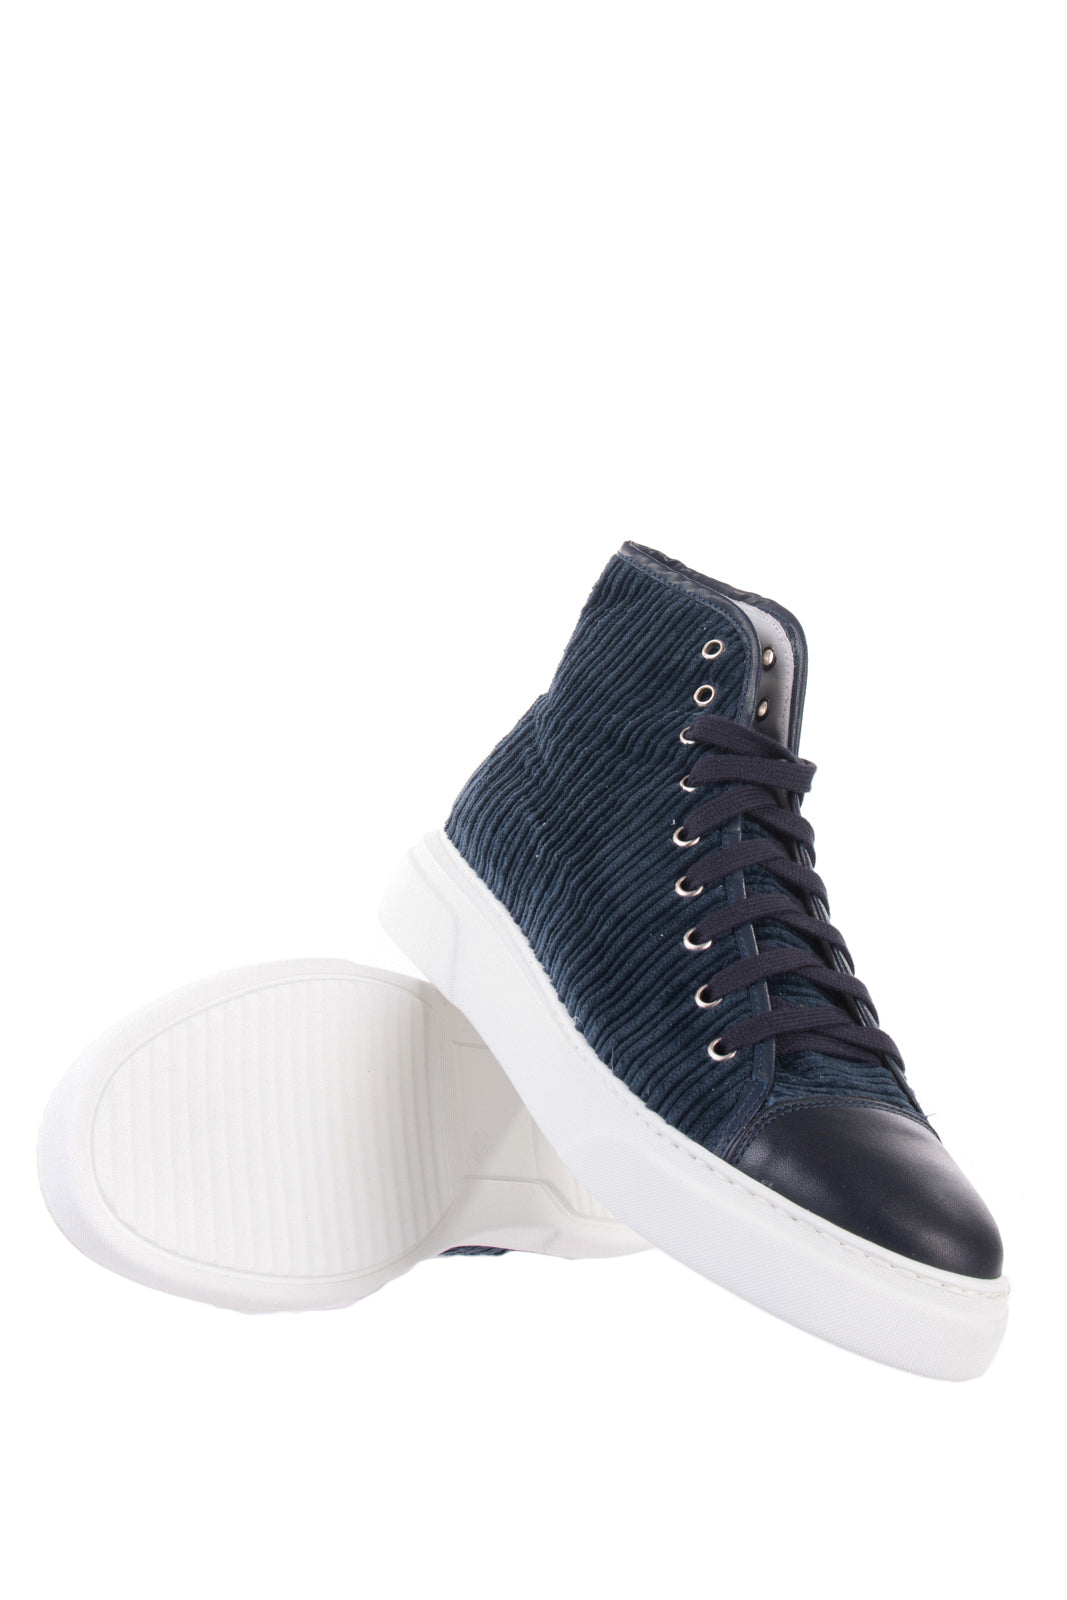 RRP €130 8 Corduroy & Leather Sneakers EU 45 UK 11 US 12 Lace Up Made in Italy gallery main photo